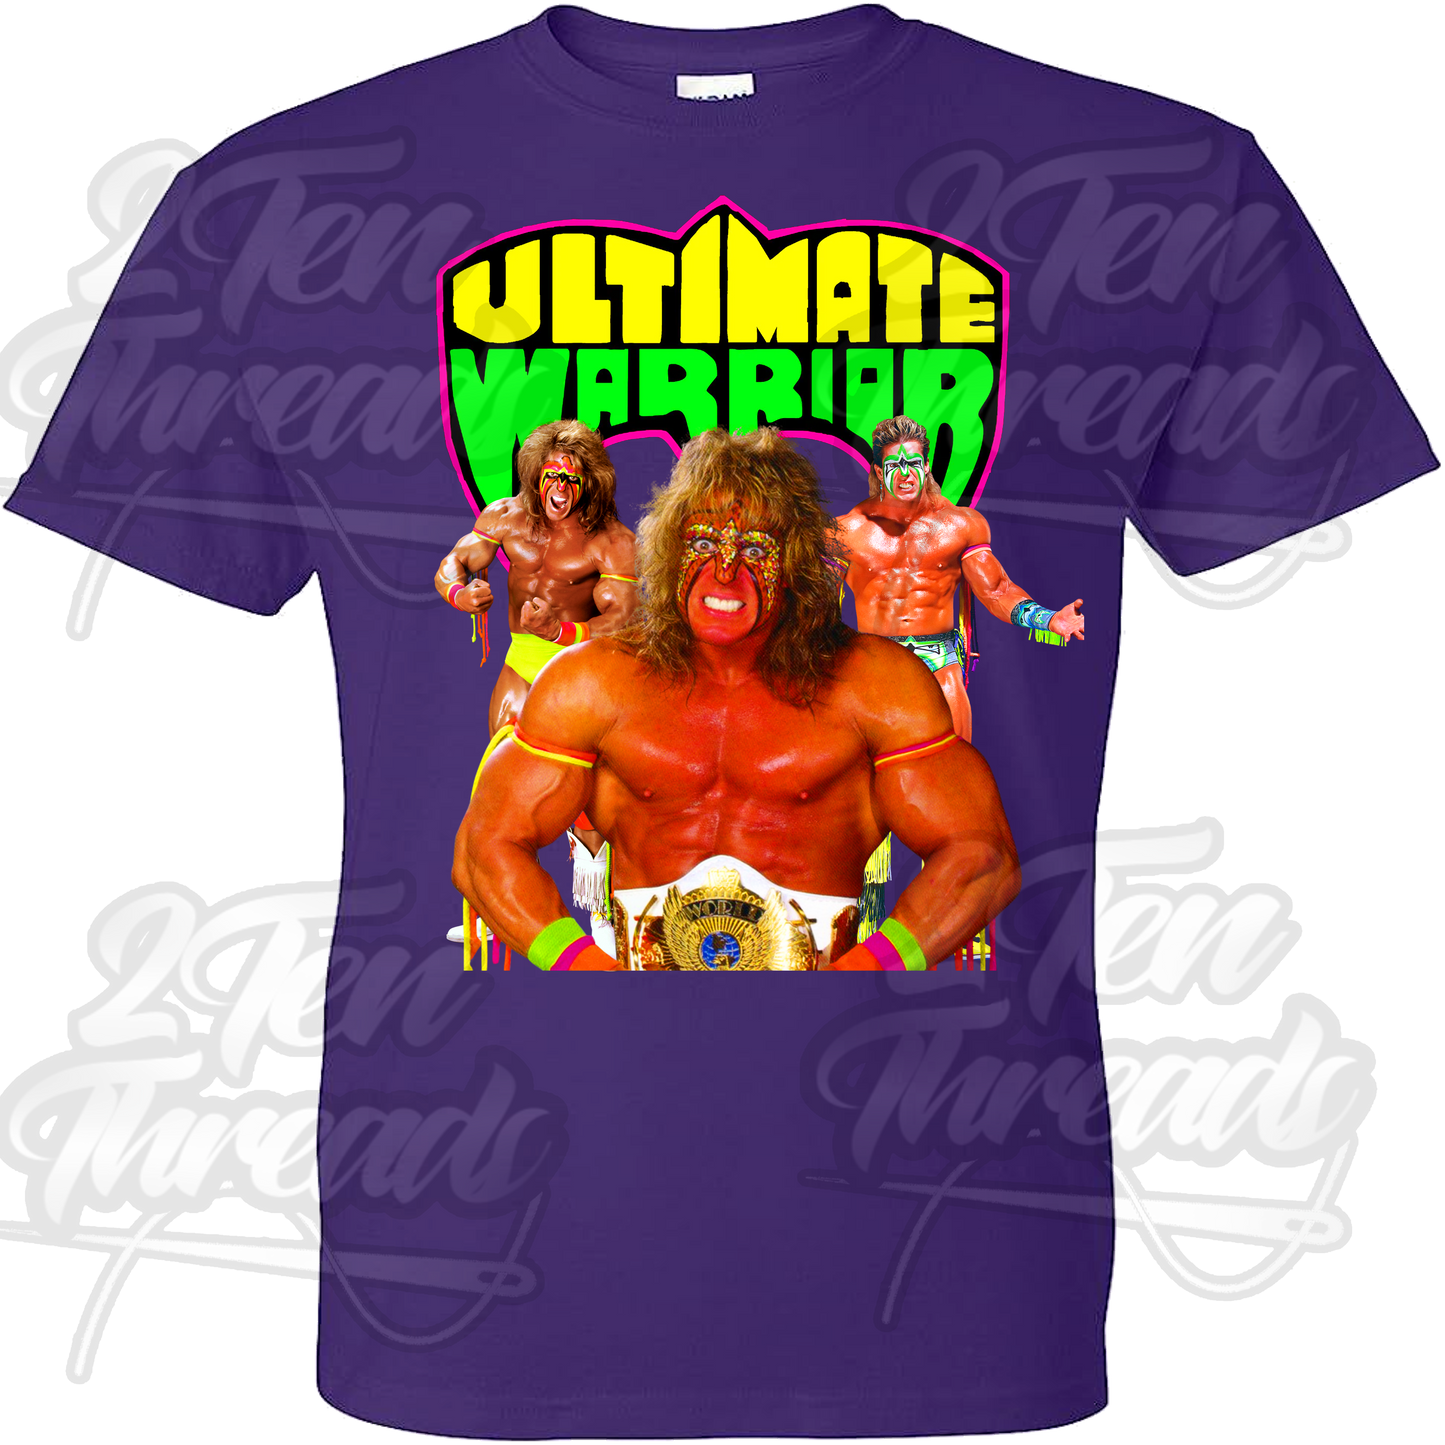 The Ultimate Warrior Shirt